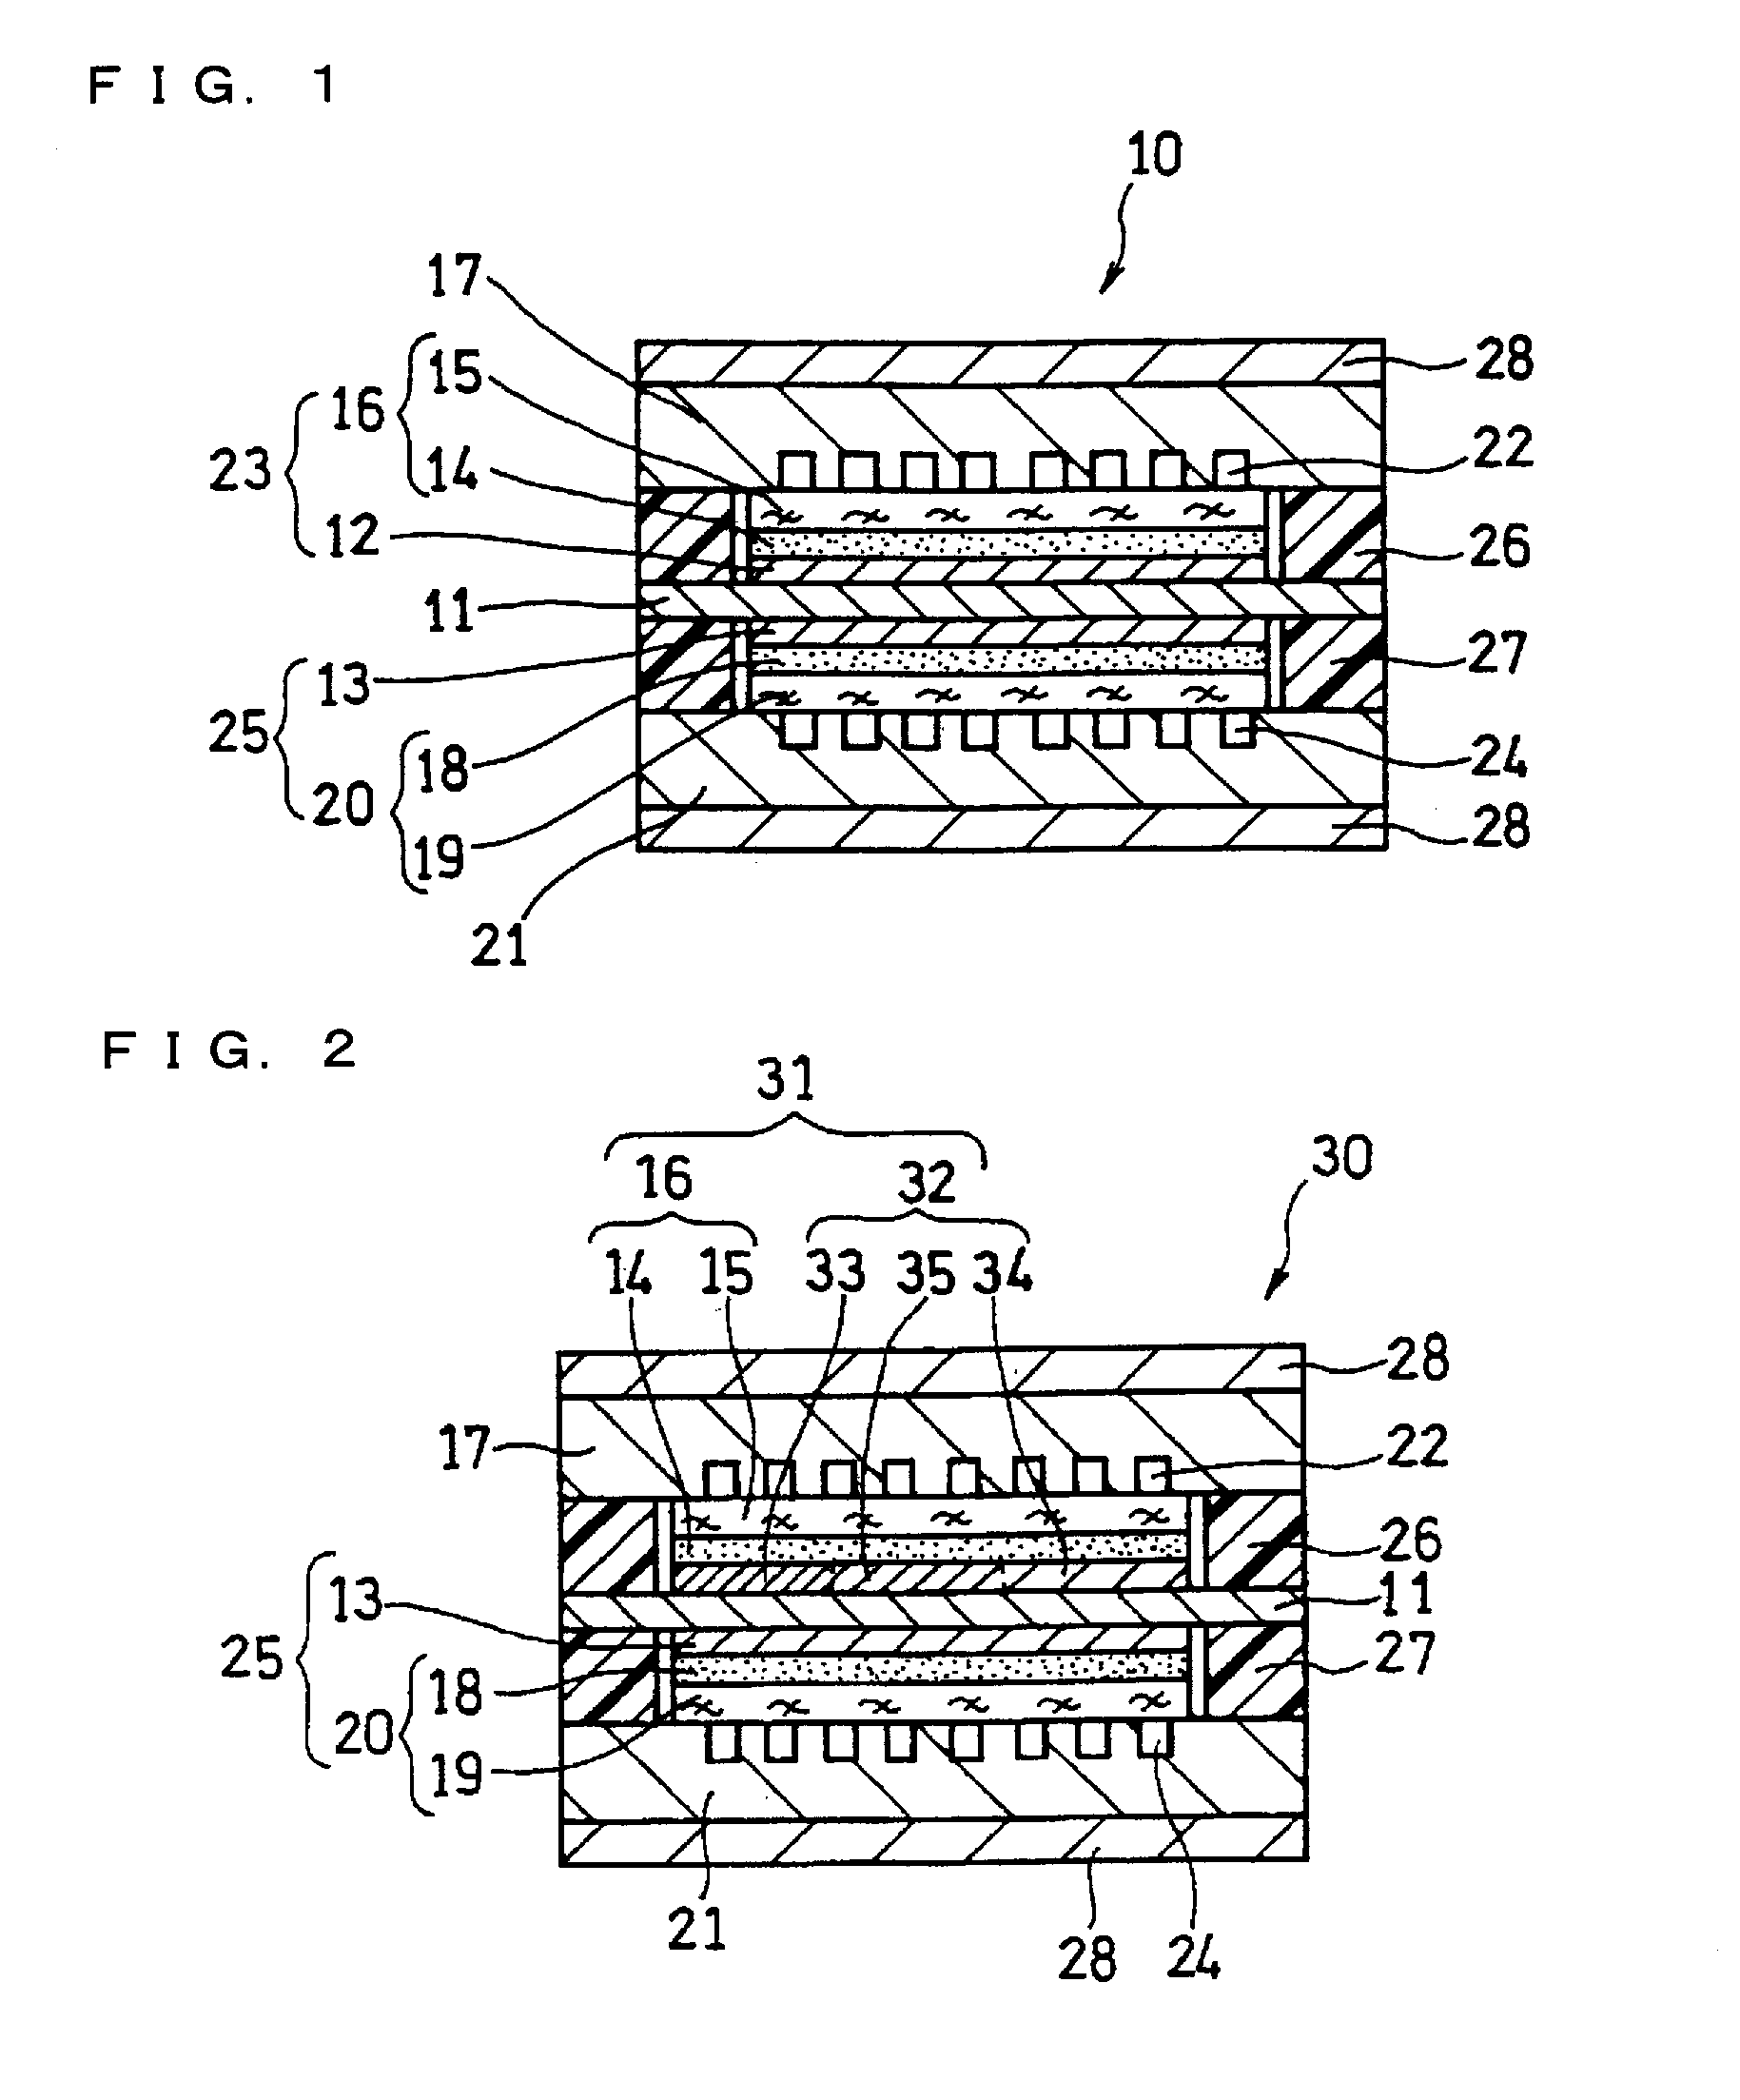 Direct oxidation fuel cell